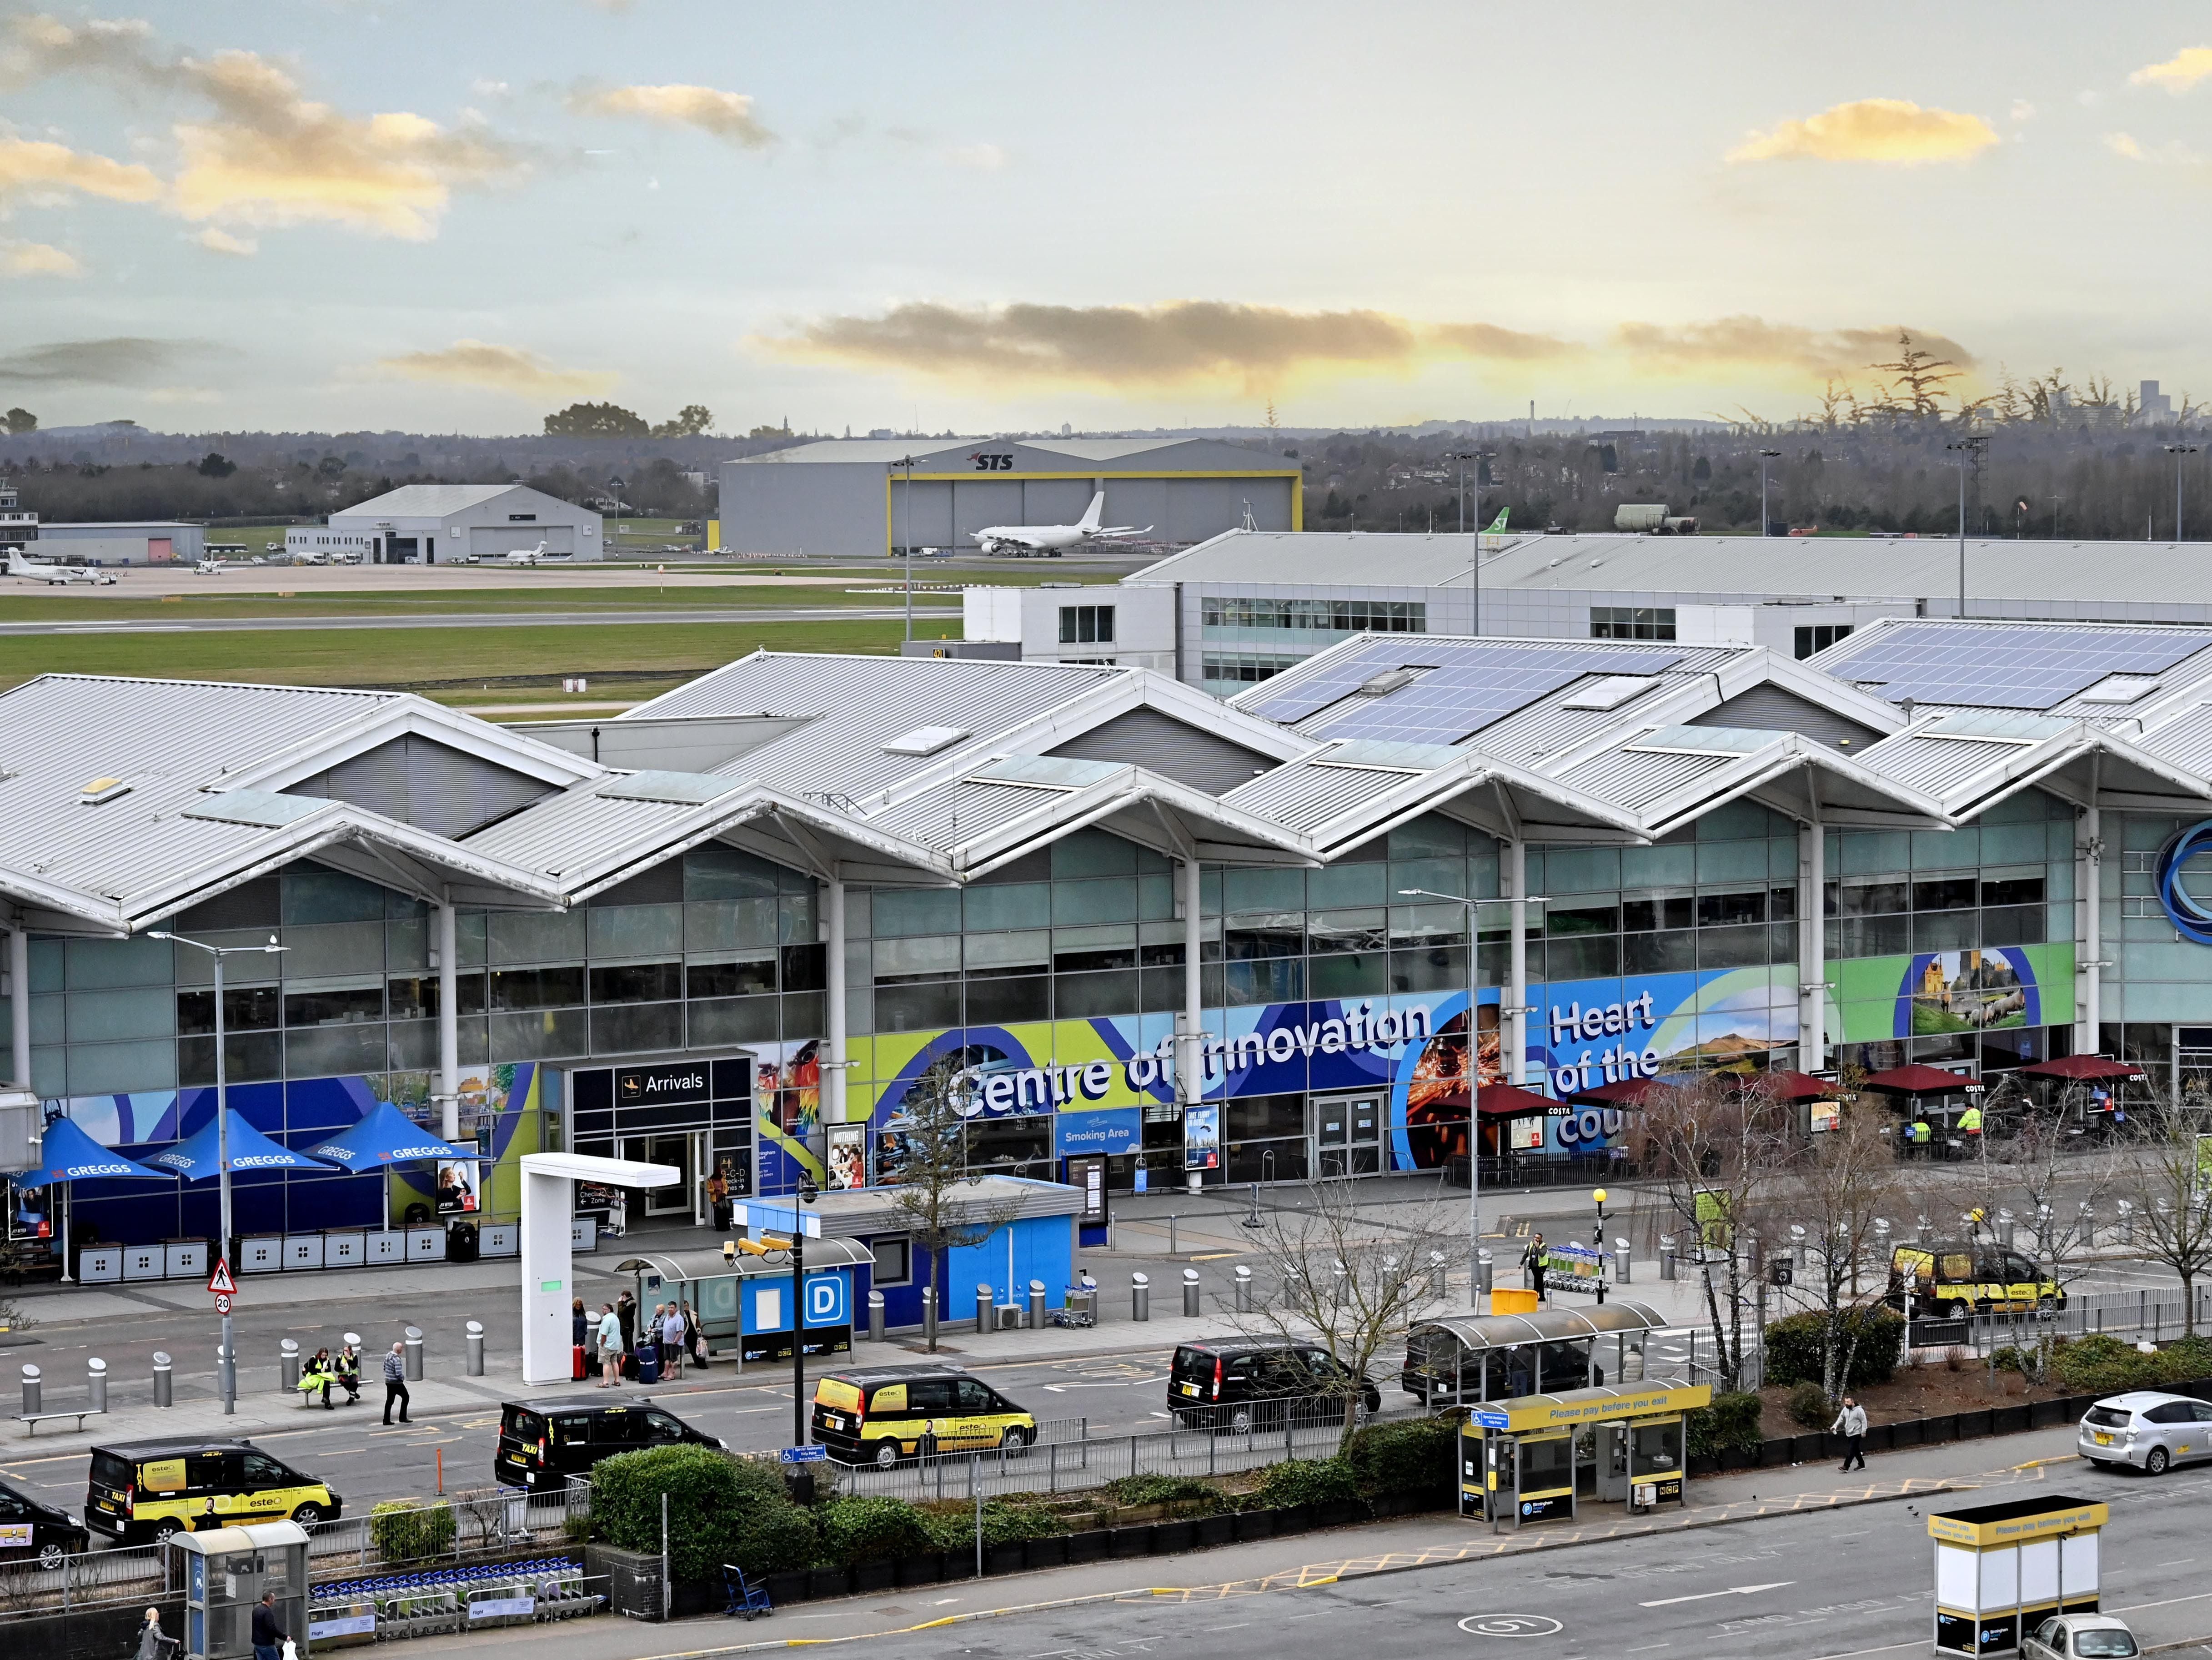 £5 for 15 minutes – how Birmingham Airport is putting up car parking charges